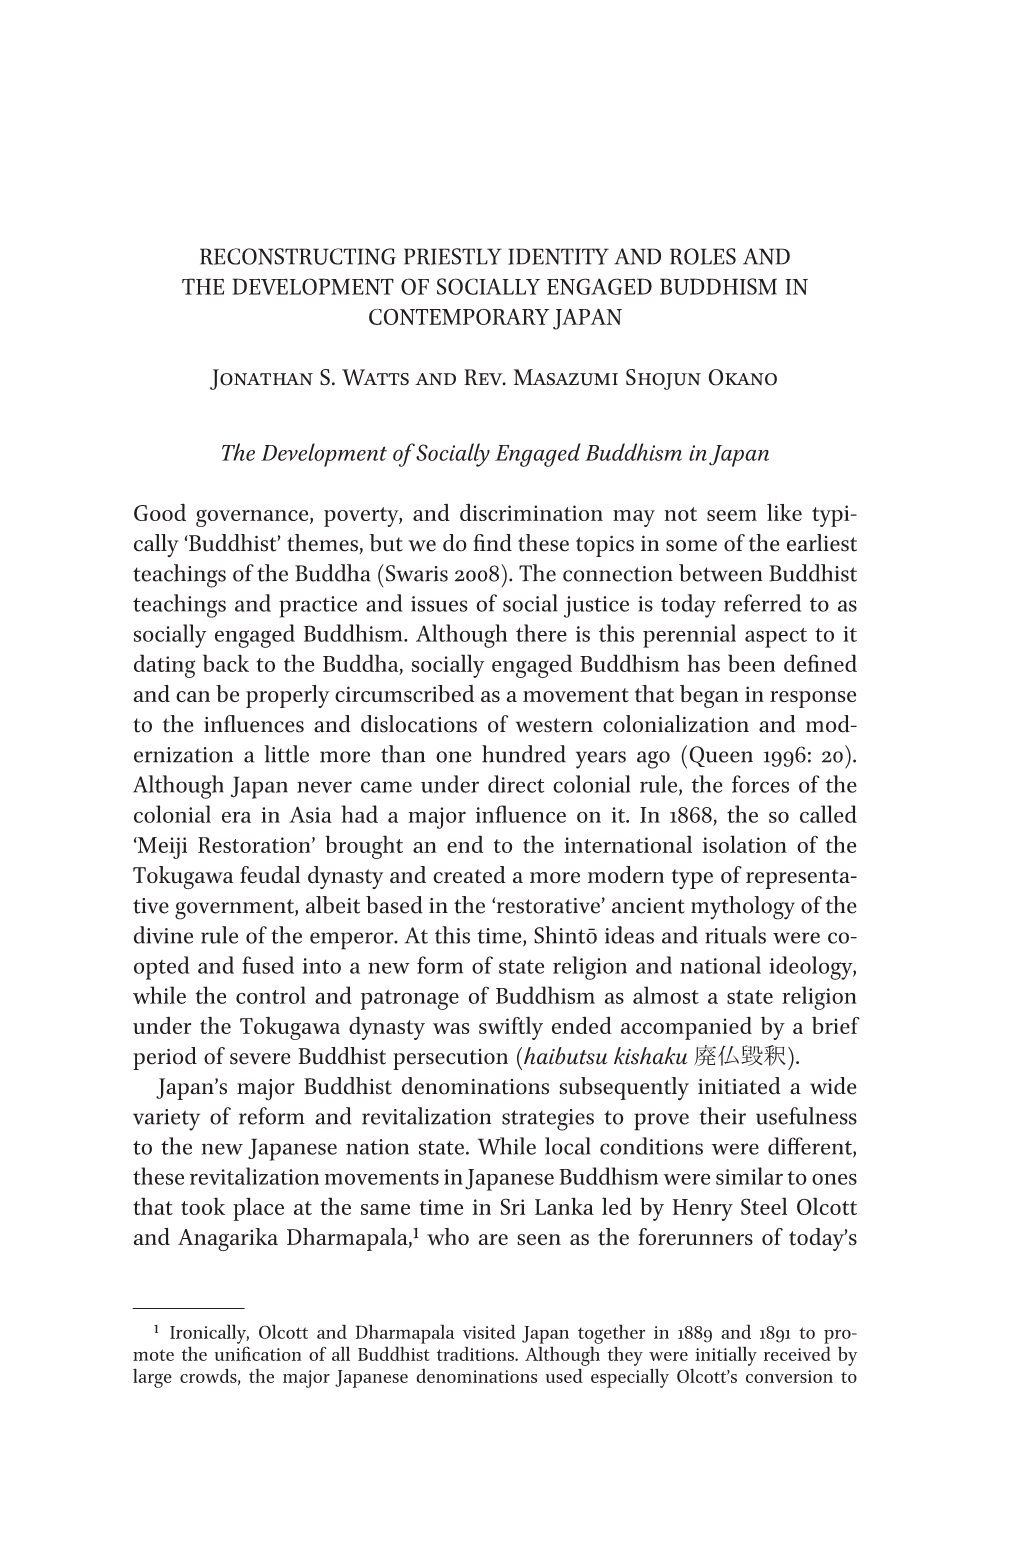 Reconstructing Priestly Identity and Roles and the Development of Socially Engaged Buddhism in Contemporary Japan